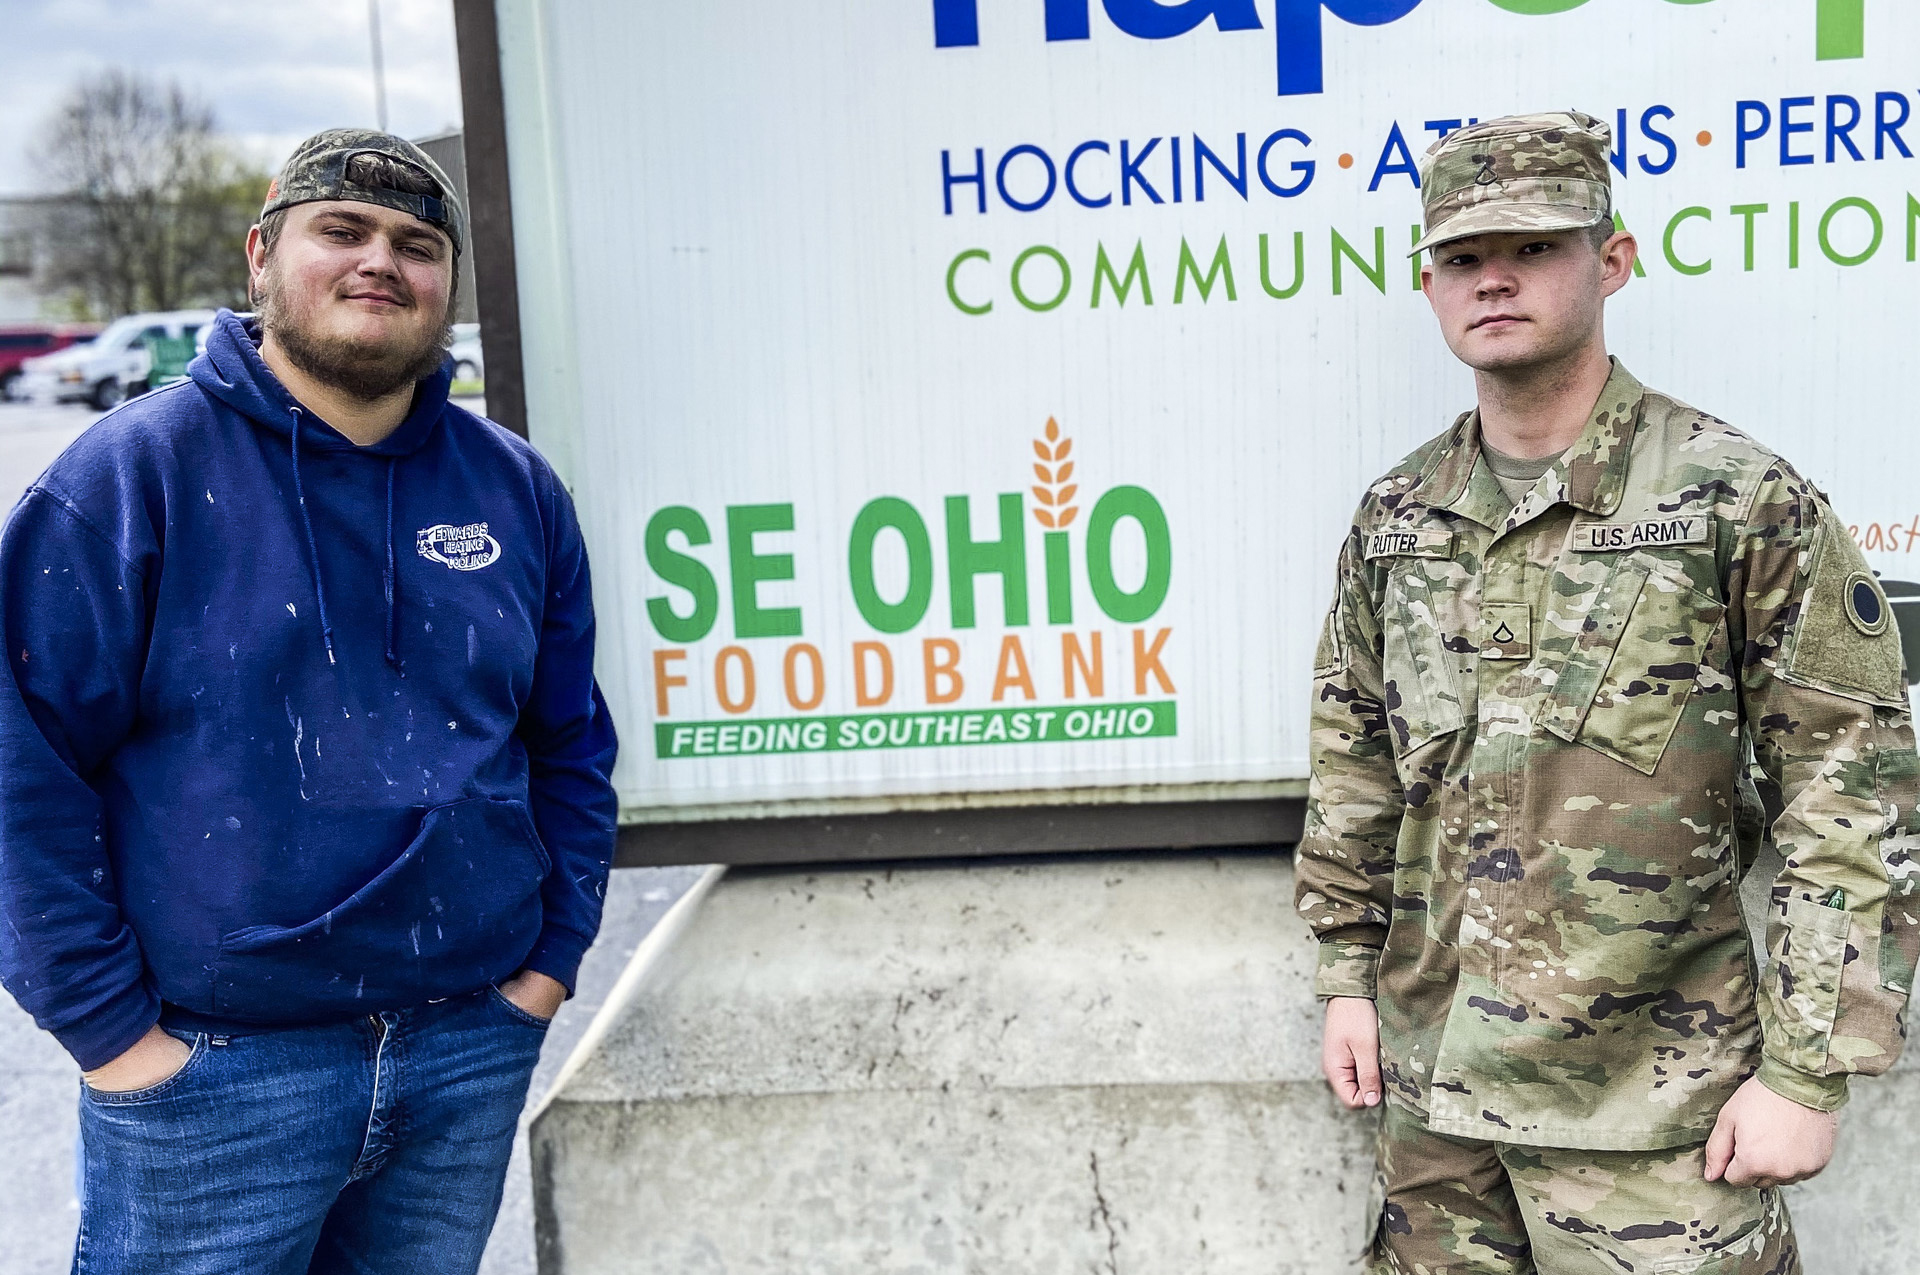 Soldier stands with man in front of food bank sign